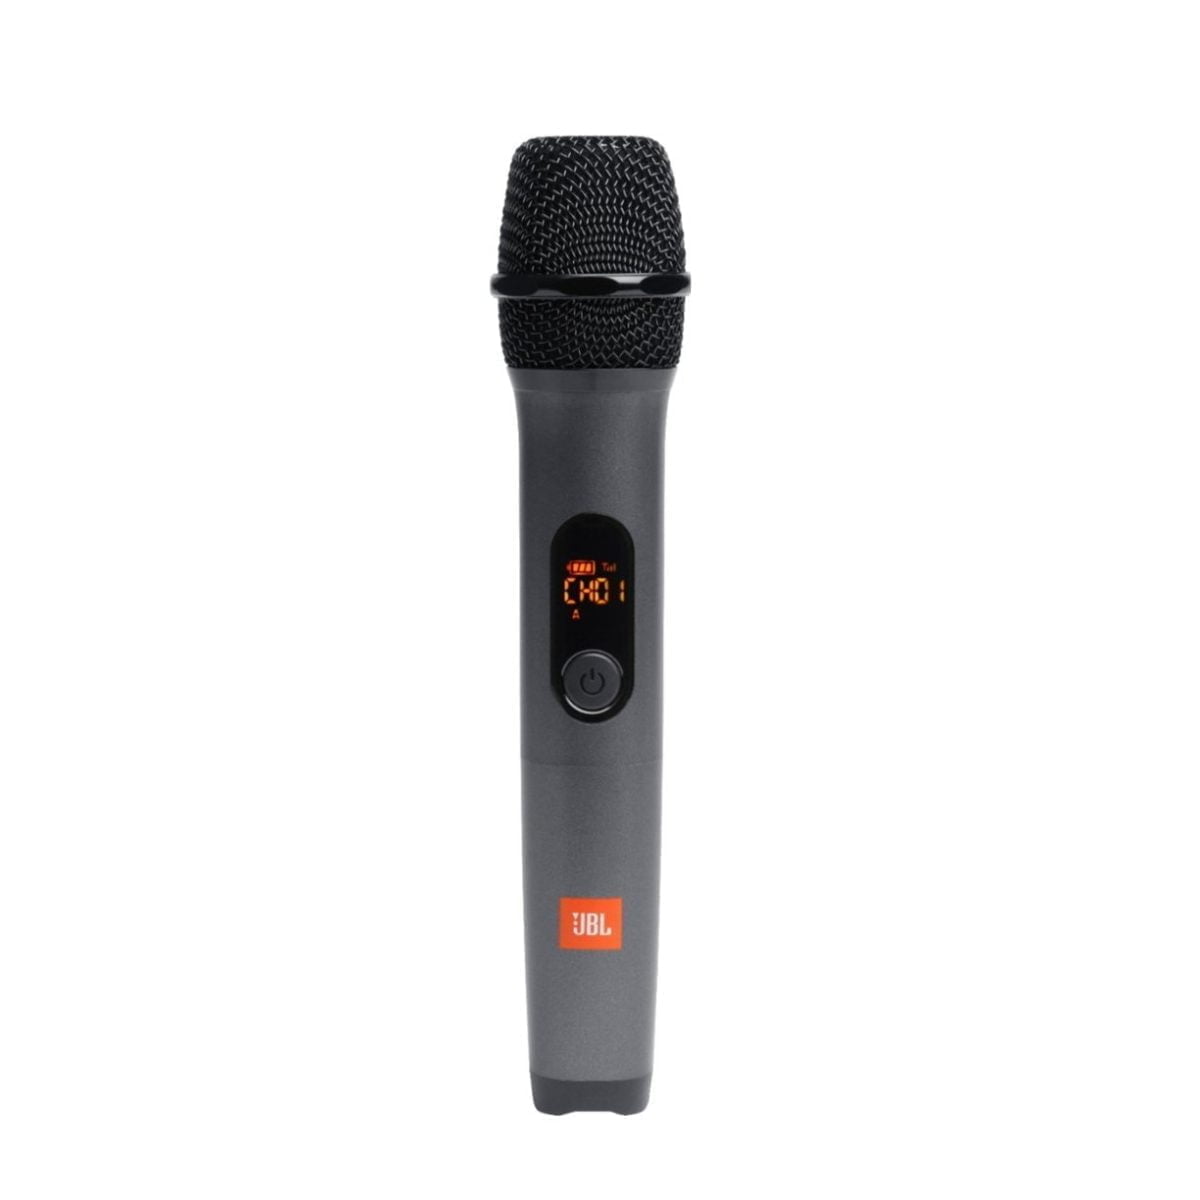 6426699Cv32D Jbl &Lt;H1 Class=&Quot;Heading-5 V-Fw-Regular&Quot;&Gt;Jbl - Partybox On-The-Go Portable Party Speaker - Black&Lt;/H1&Gt; Take Your Party Anywhere And Sing Everywhere. From Beach Parties To Festivals, The Jbl Partybox On-The-Go Lets You See, Hear And Feel The Beat. Turn It Up Loud With 100 Watts Of Powerful Jbl Pro Sound, Synched To A Dazzling Light Show. Access Your Favorite Tunes With Bluetooth, Usb, Aux And Tws (True Wireless Stereo) Connectivity, Grab A Friend And Sing Your Hearts Out With The Jbl Wireless Mics, Or Use The Instrument Input To Play Along. With A Bottle Opener, Padded Shoulder Strap, Rechargeable Battery And Ipx4 Splash-Proof Protection, The Jbl Partybox On-The-Go Has Everything You Need To Get The Party Started—And Take It With You. Jbl Partybox Jbl Partybox On-The-Go Portable Party Speaker - Black